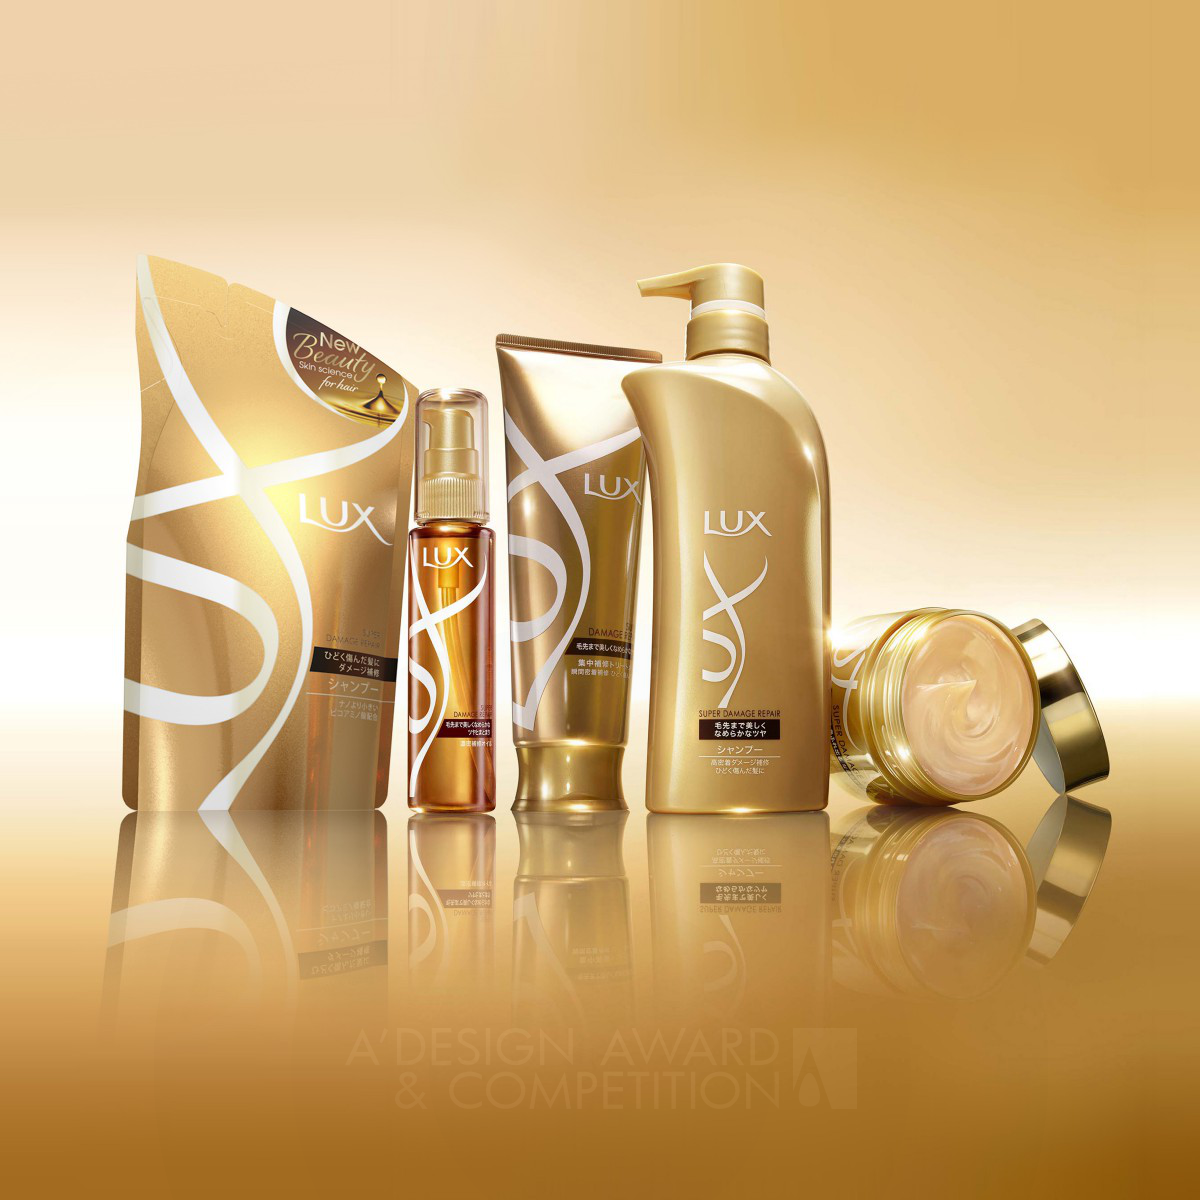 Lux re-launch in Japan <b>Haircare range